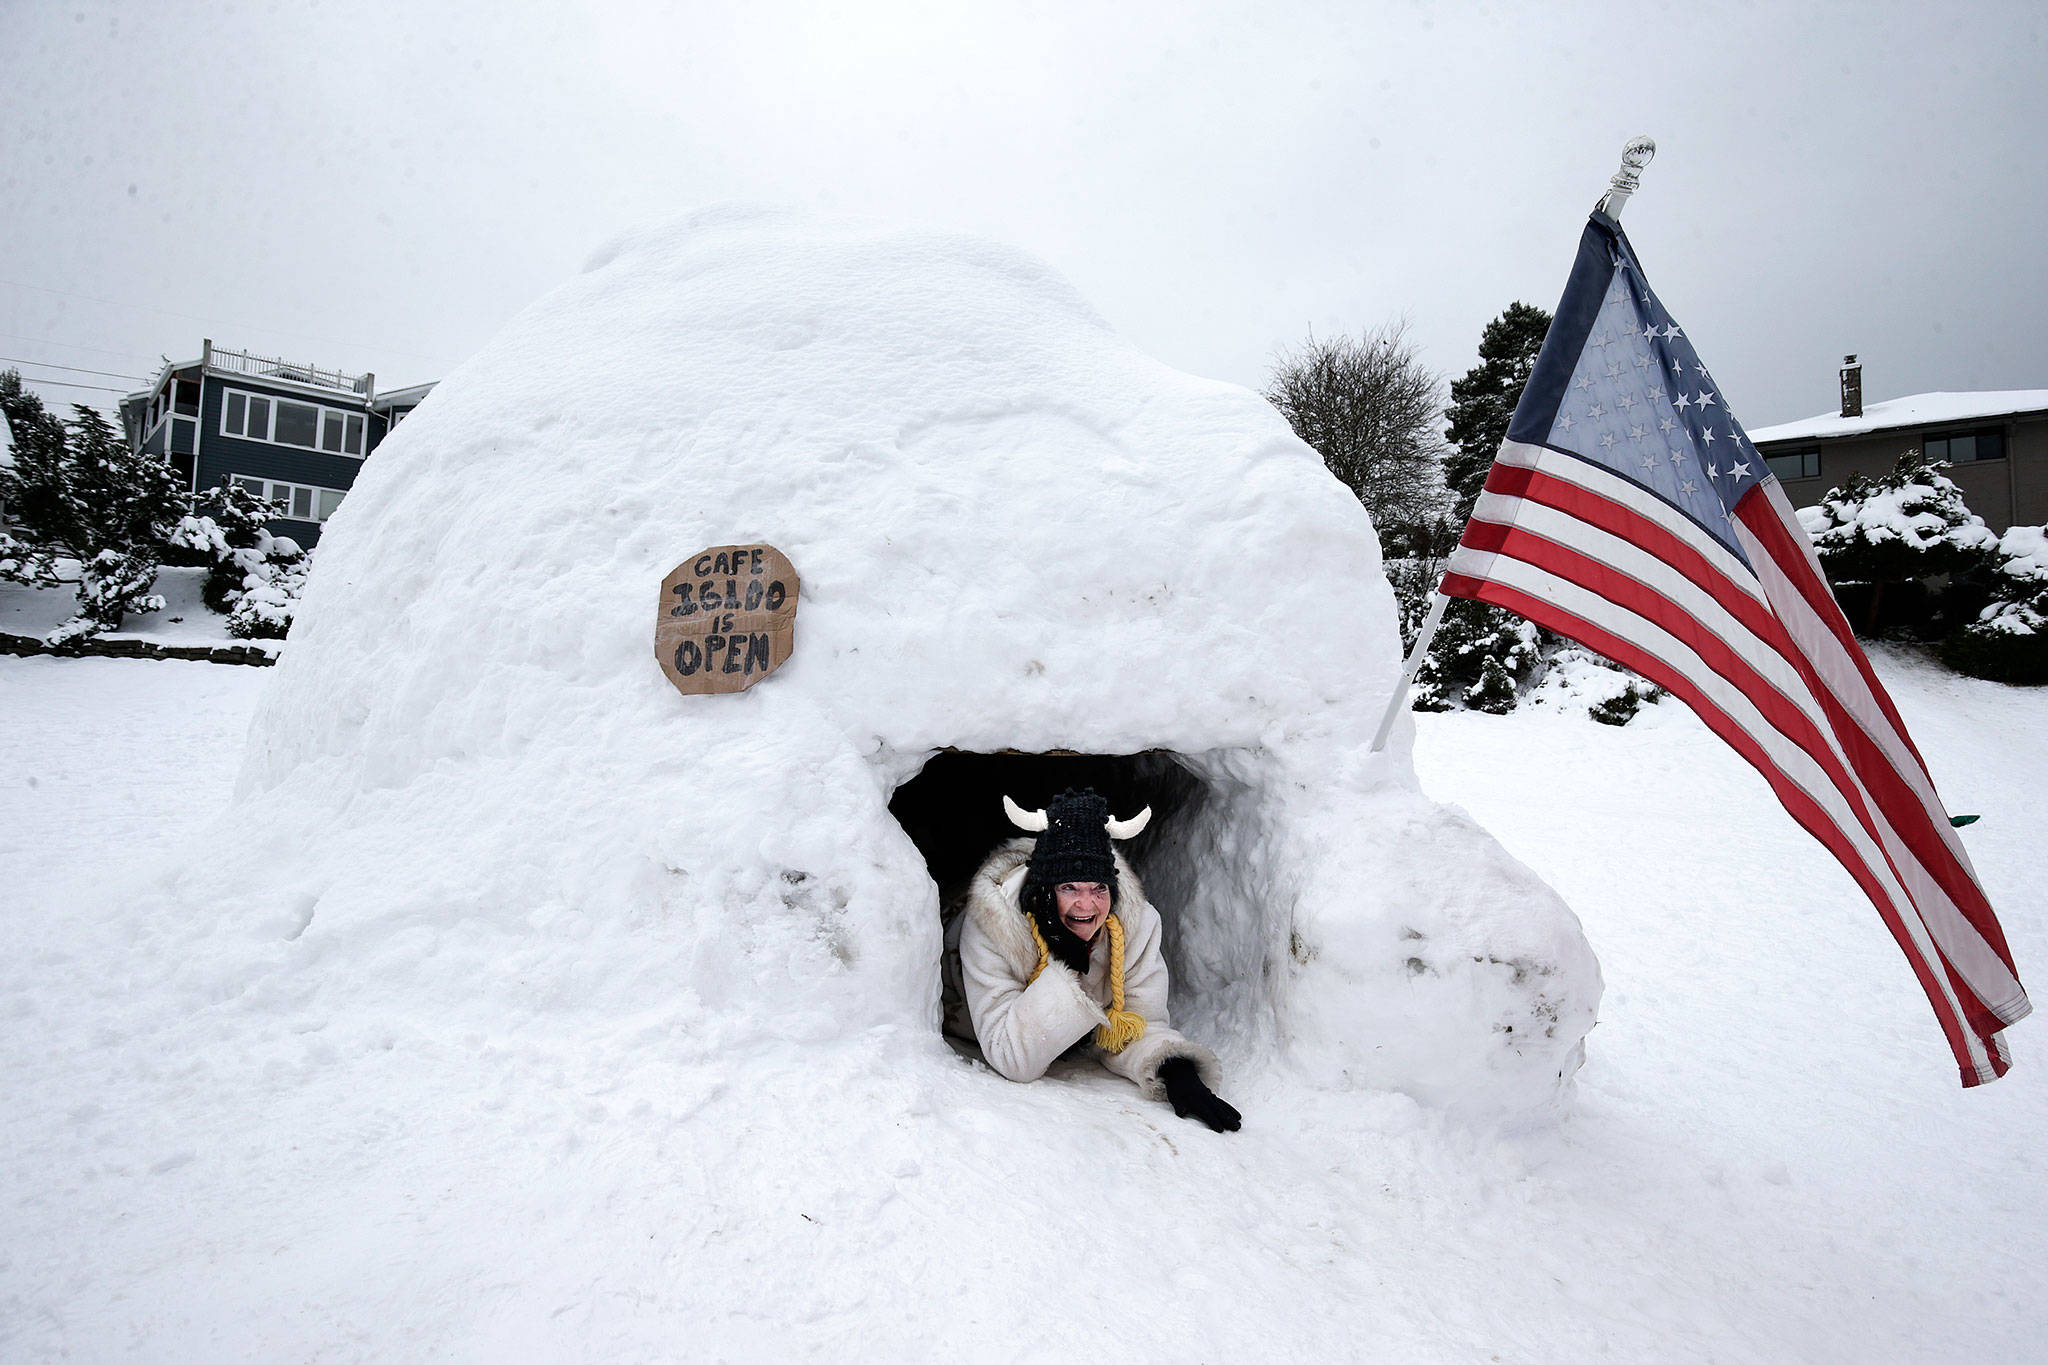 Cherie Hansen poses for a photo in the doorway of the “Cafe Igloo” in Rucker Hill Park on Monday in Everett. (Andy Bronson / The Herald)